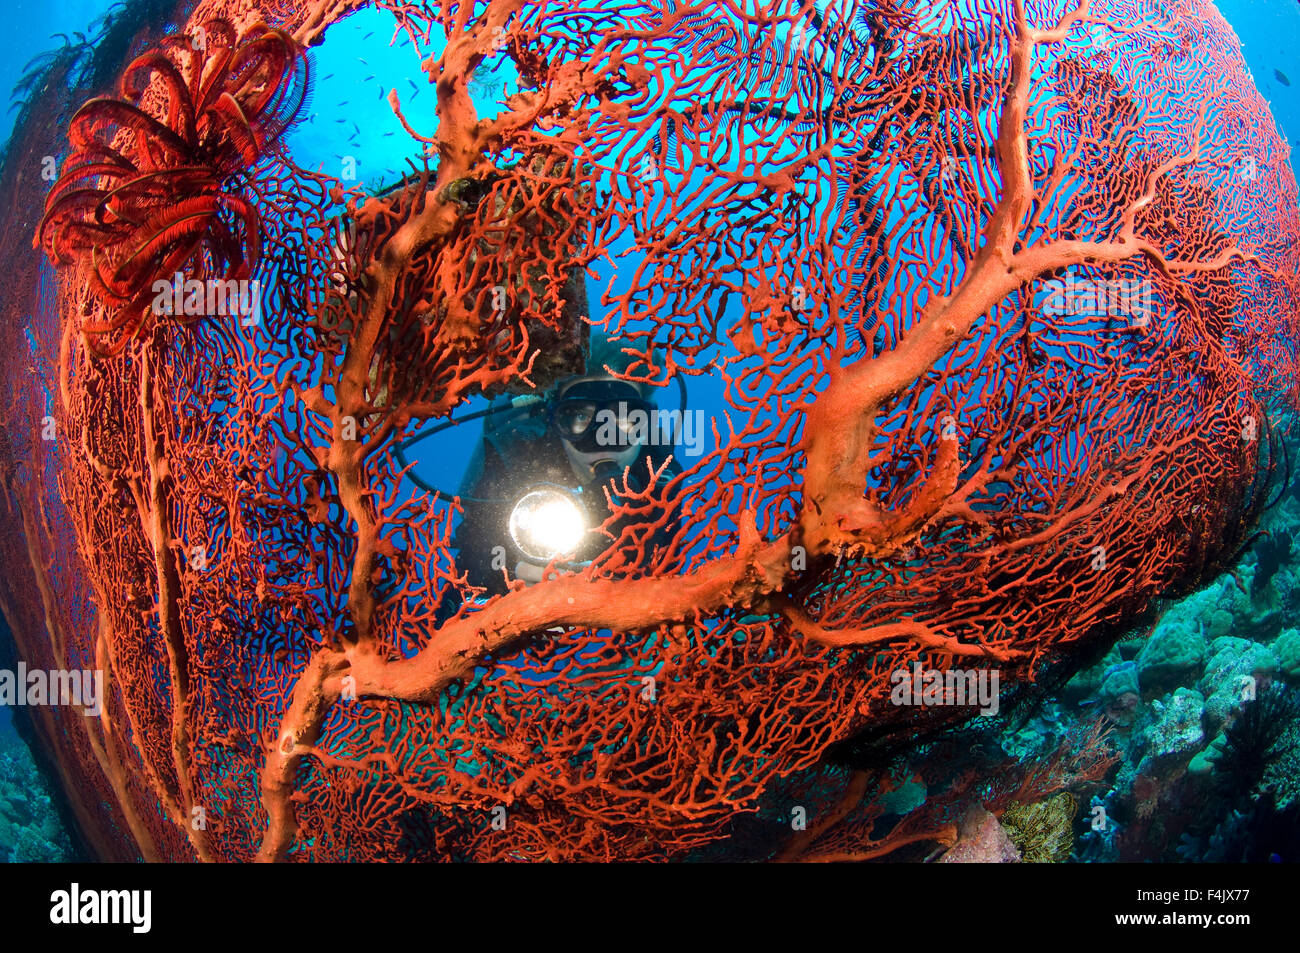 Red sea fan with diver Stock Photo